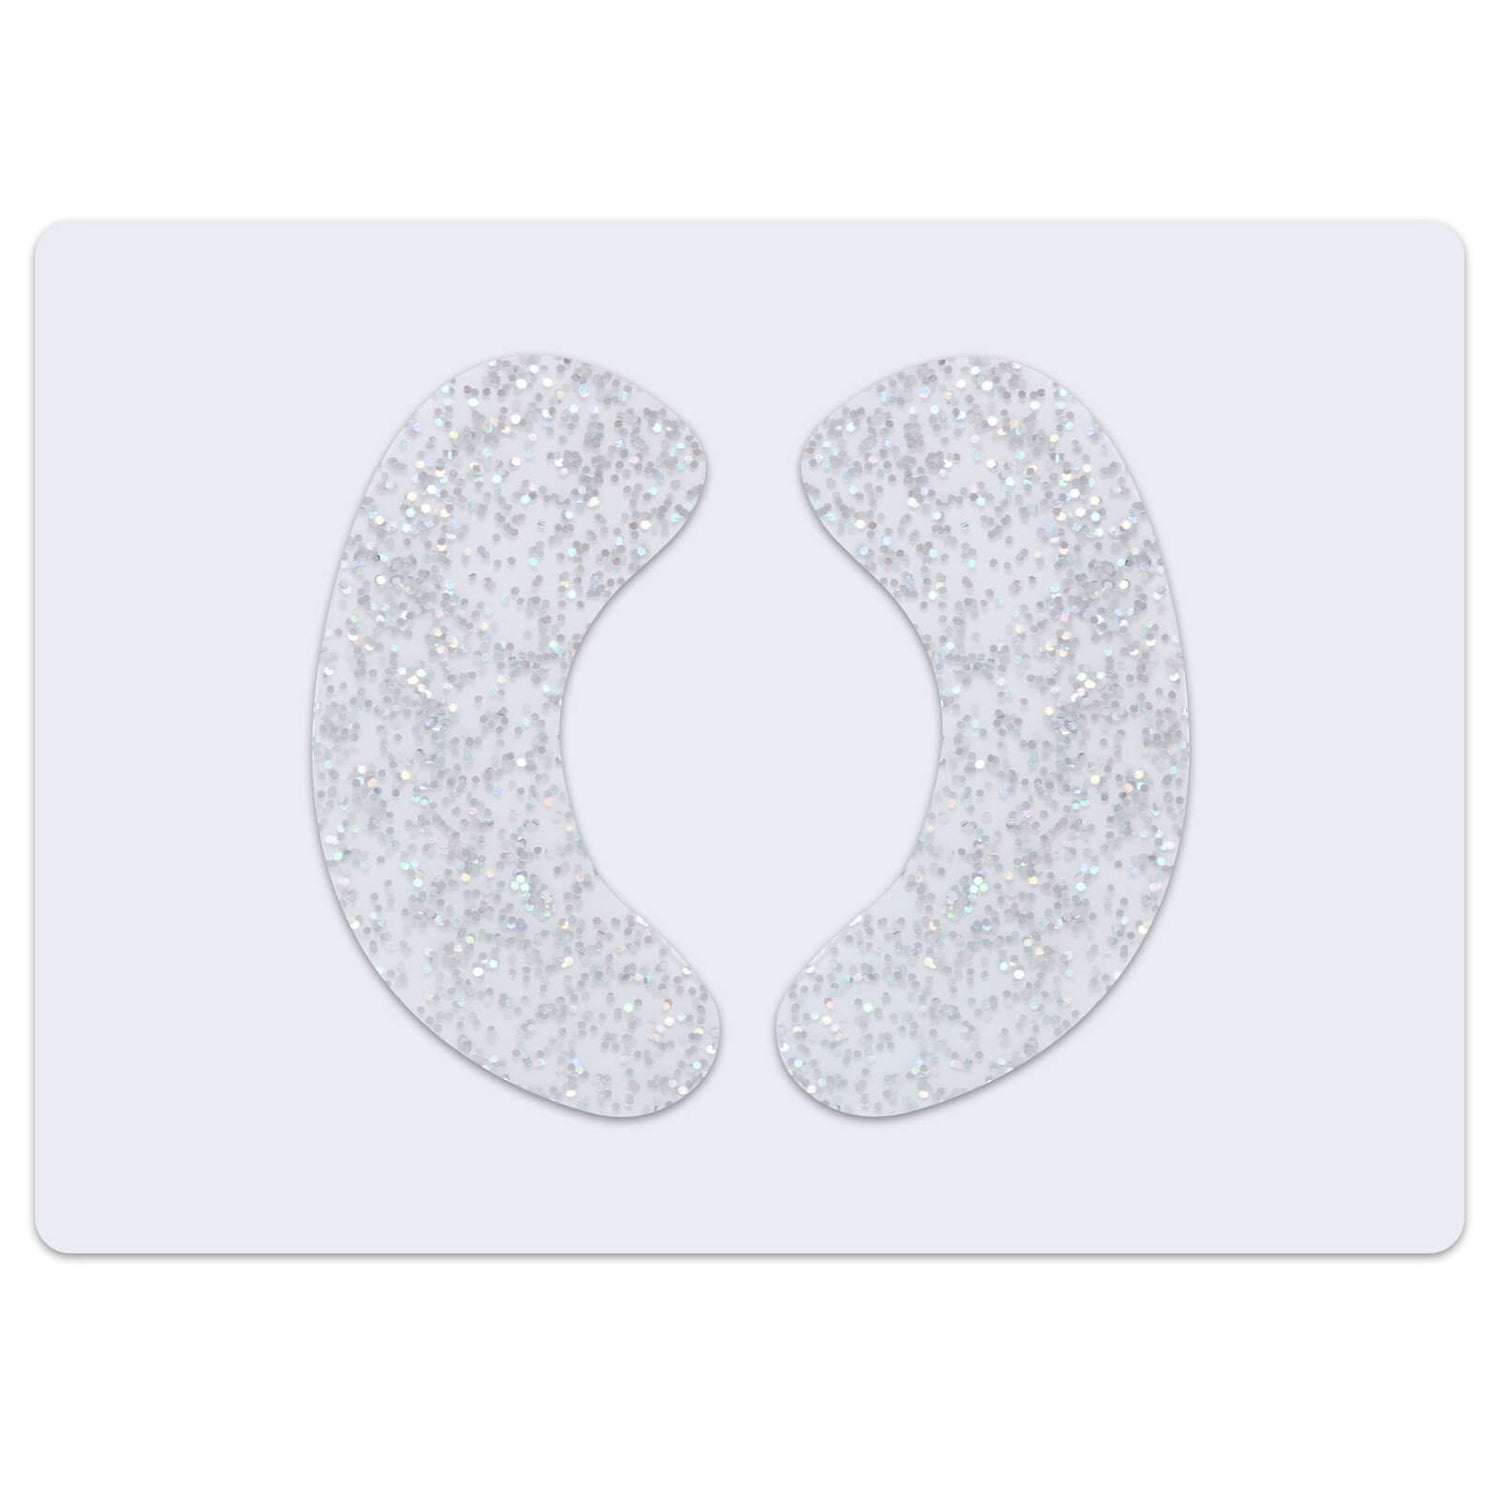 SiO Supereye Silver Sparkle (2 Pack)